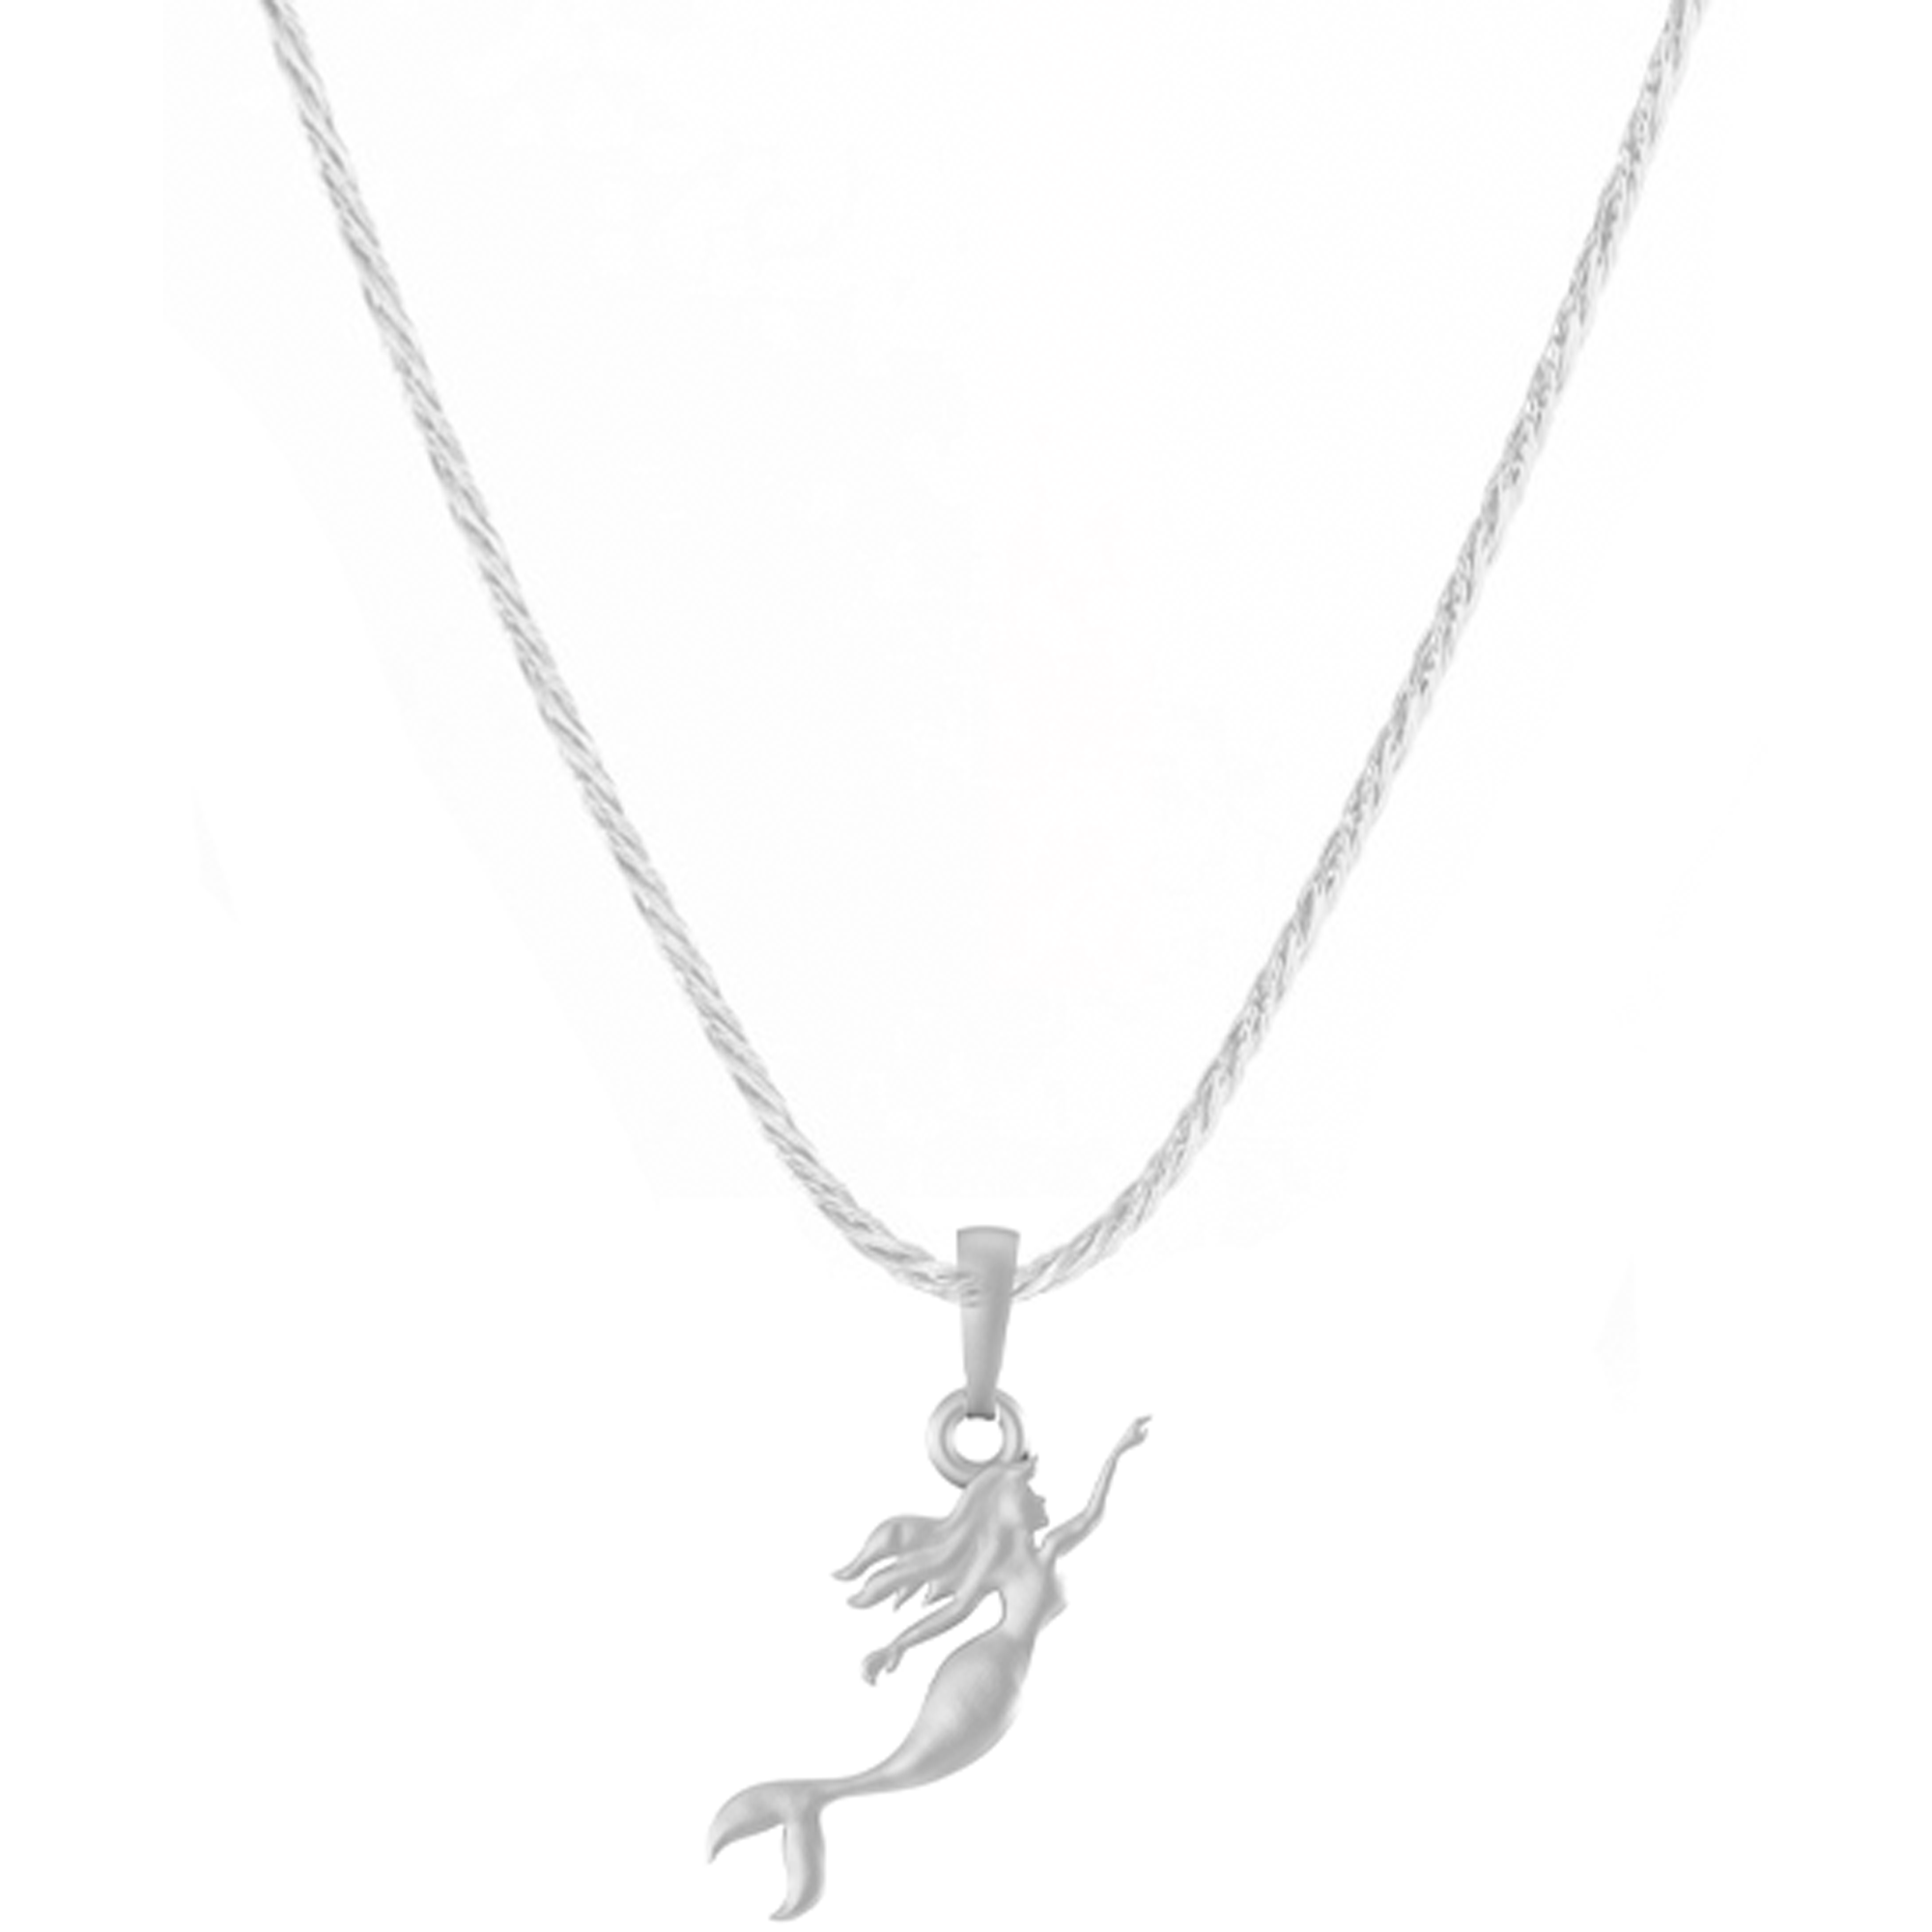 Akshat Sapphire Sterling Silver (92.5% purity) ambitious and Stylish divine Mermaid Chain Pendant  (Pendant with Rope Chain-22 inches) for Men & Women Pure Silver Fashionable and gorgeous Mermaid Chain Locket for Happiness and joy